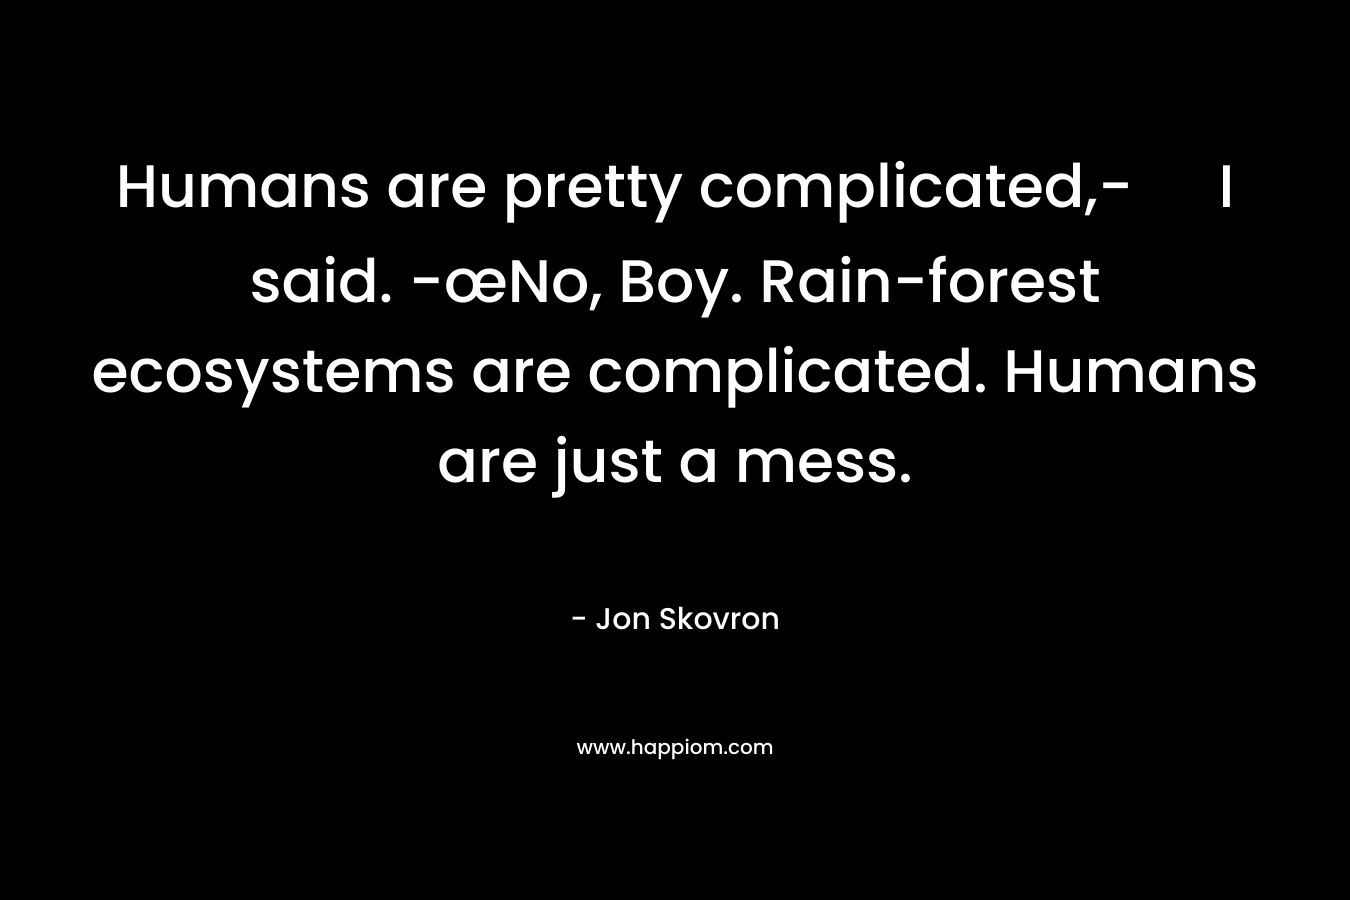 Humans are pretty complicated,- I said. -œNo, Boy. Rain-forest ecosystems are complicated. Humans are just a mess.